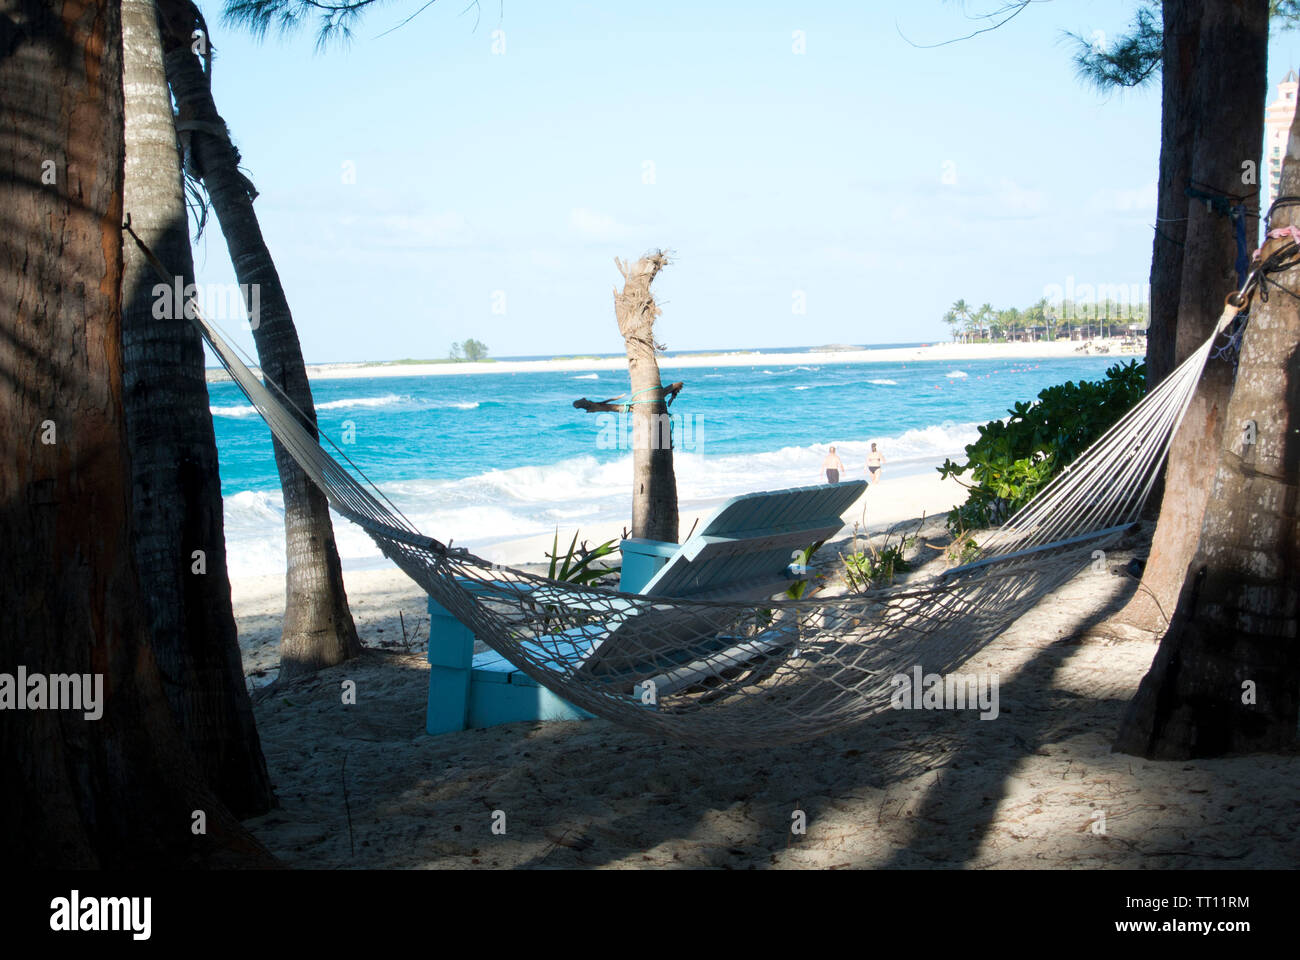 Fabric rope hammock suspended by palm trees in a tropical beach Stock Photo